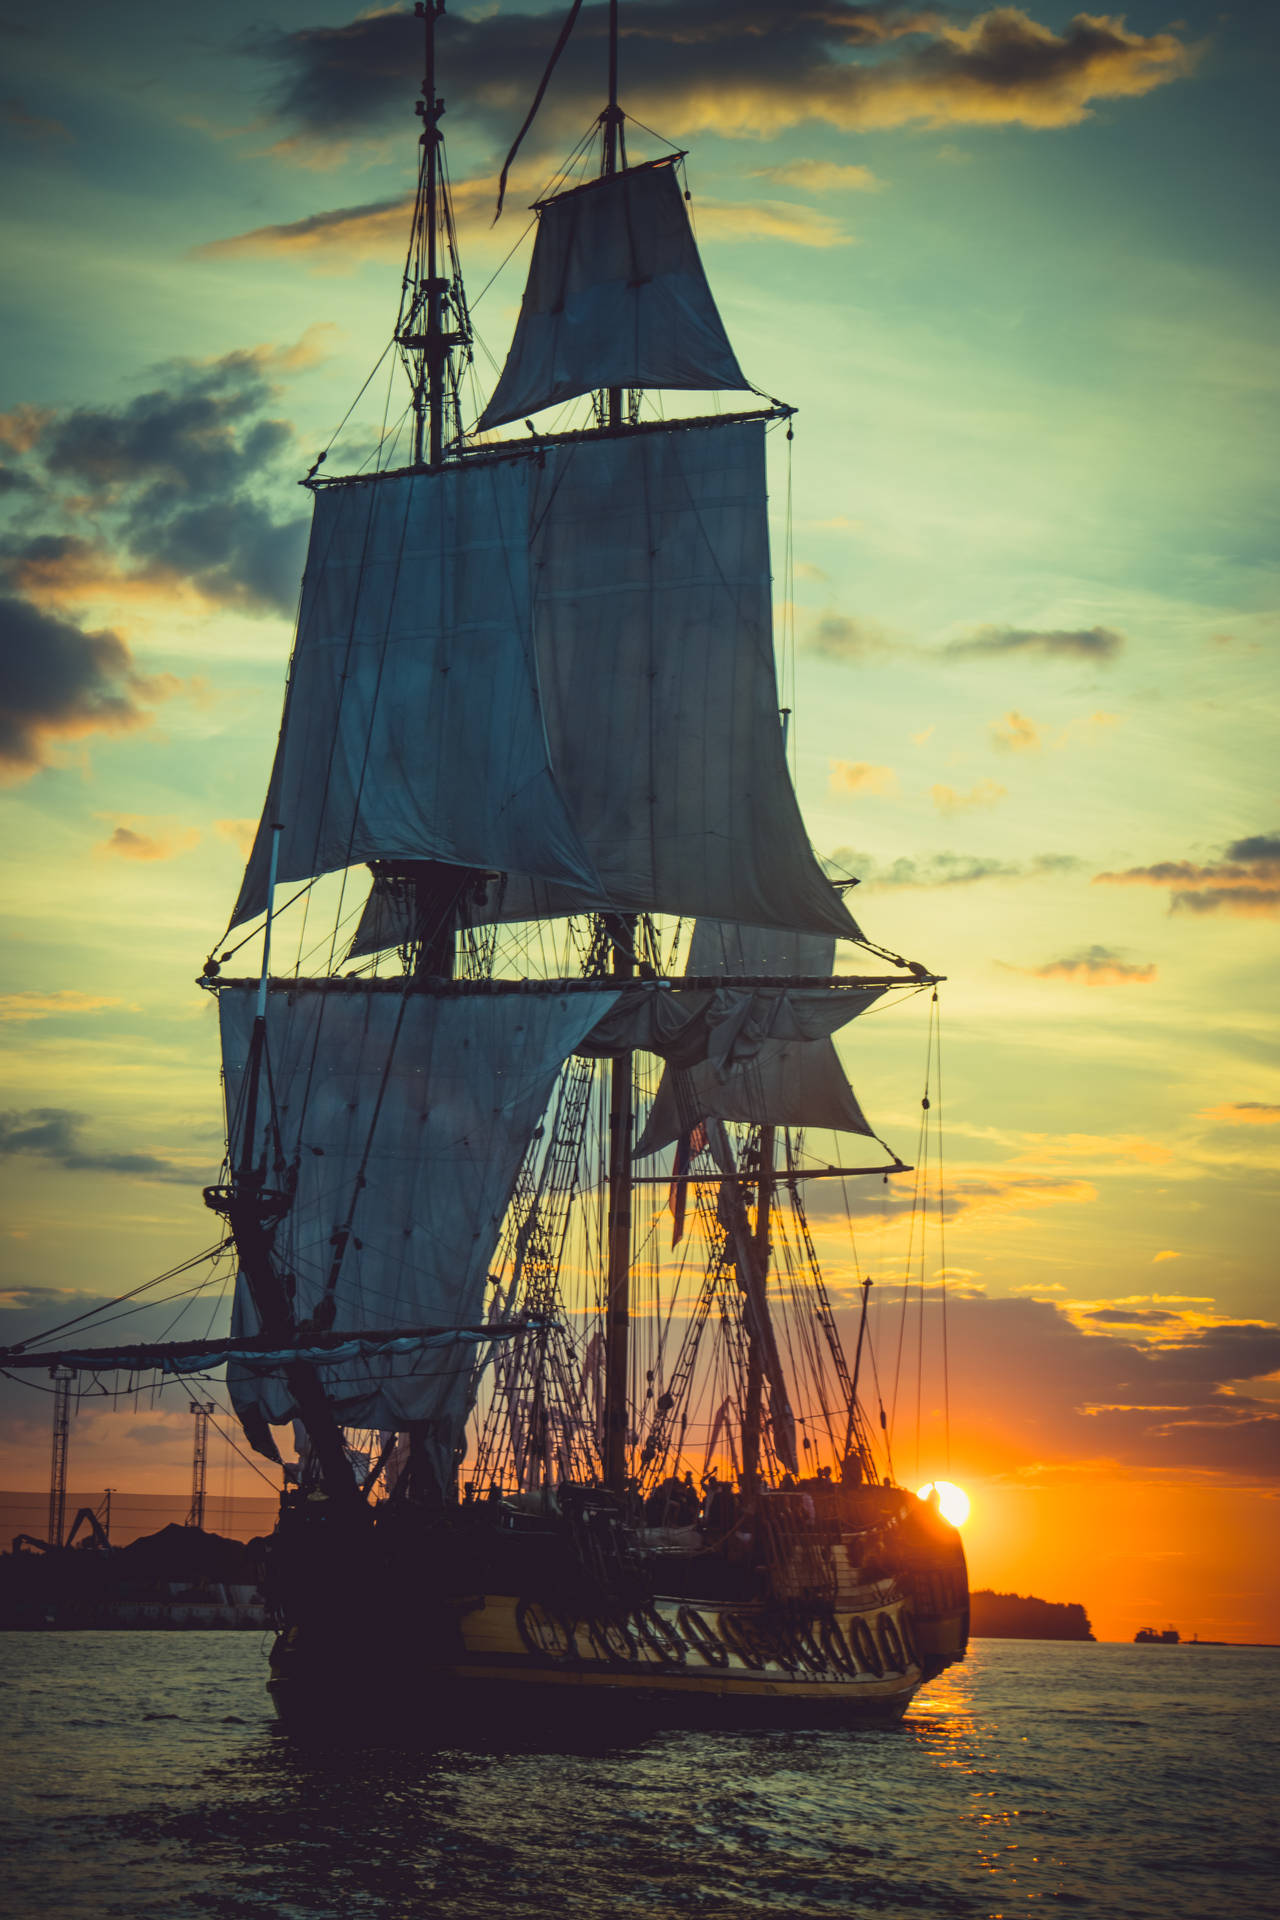 Pirate Ship At Sunset Background